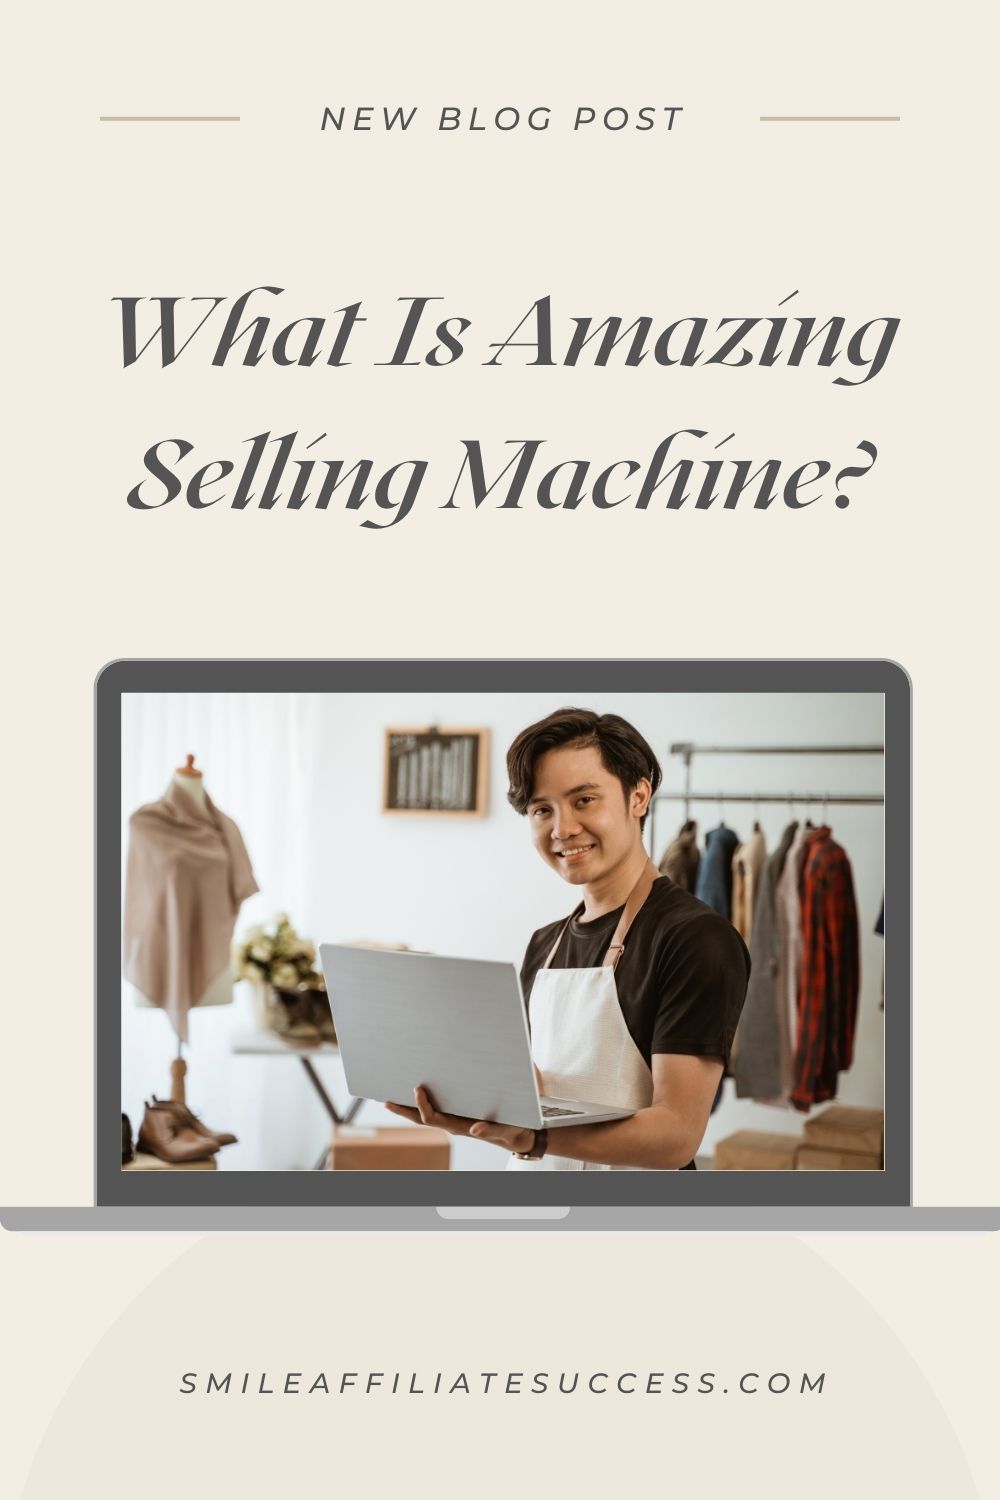 What Is Amazing Selling Machine?